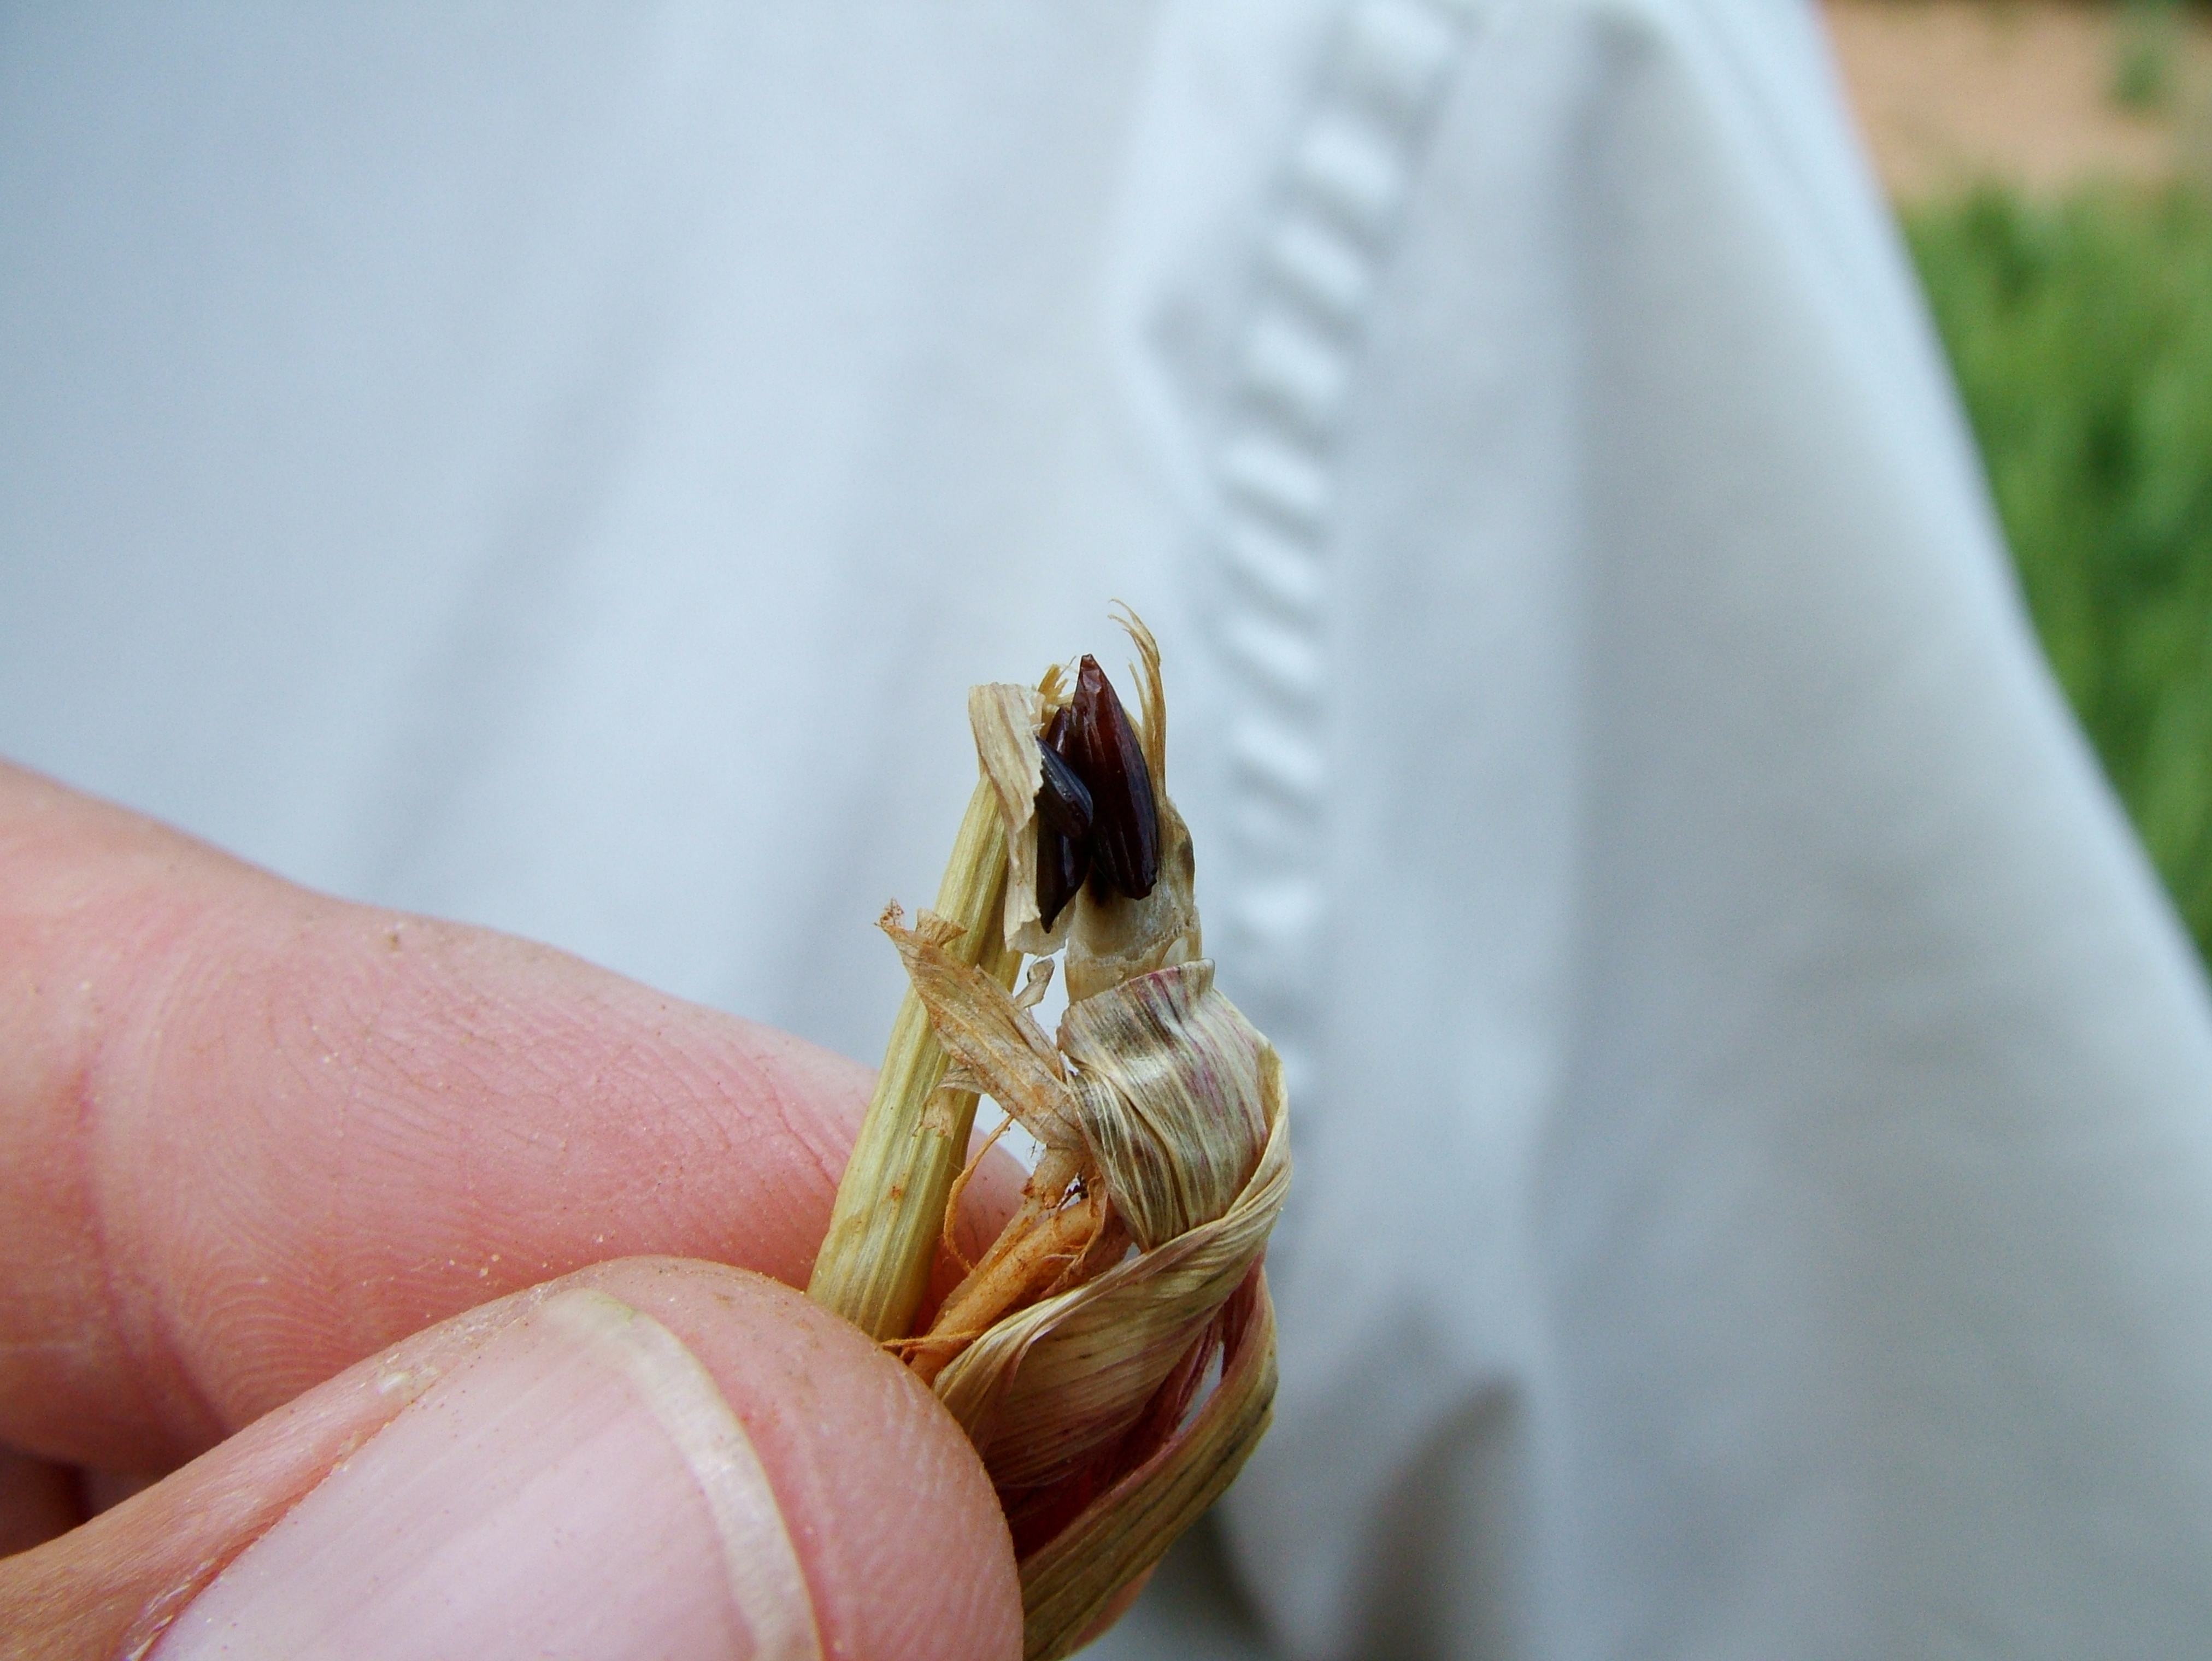 Hessian fly pupae in wheat crown. Details in text following the image.